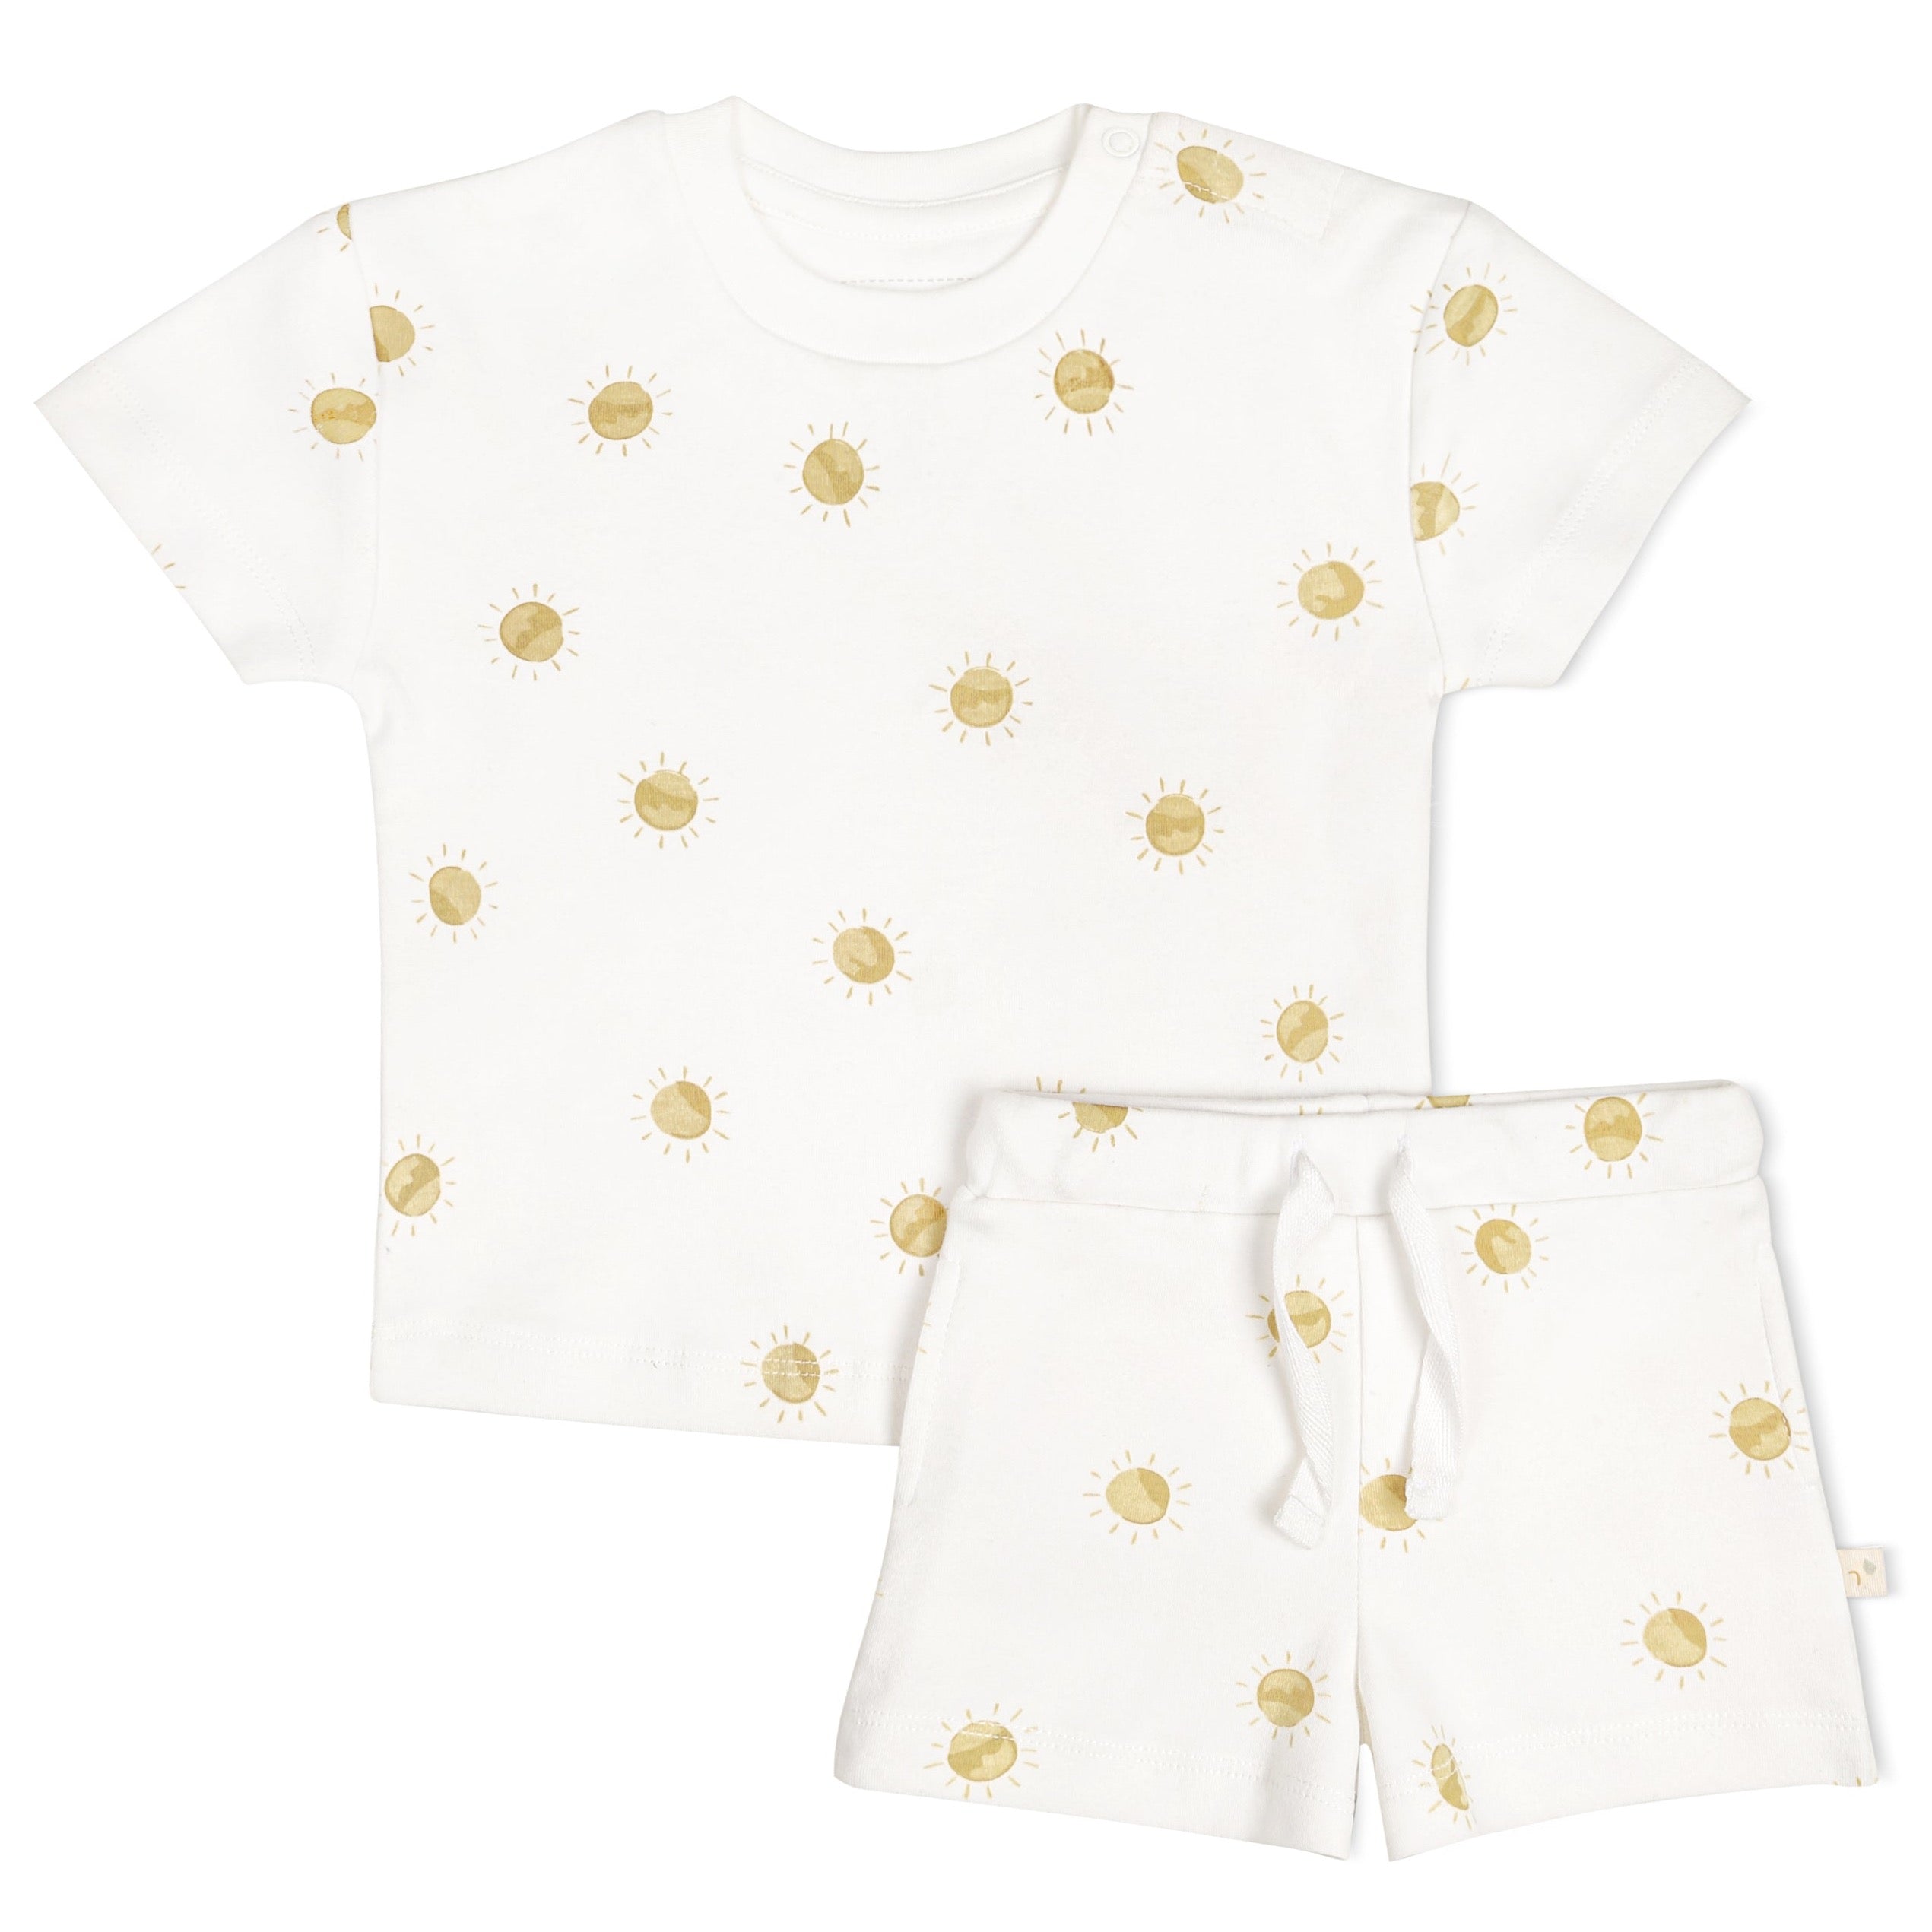 A Makemake Organics Organic Tee and Shorts Set - Sunshine with a pattern of yellow suns, displayed on a white background.